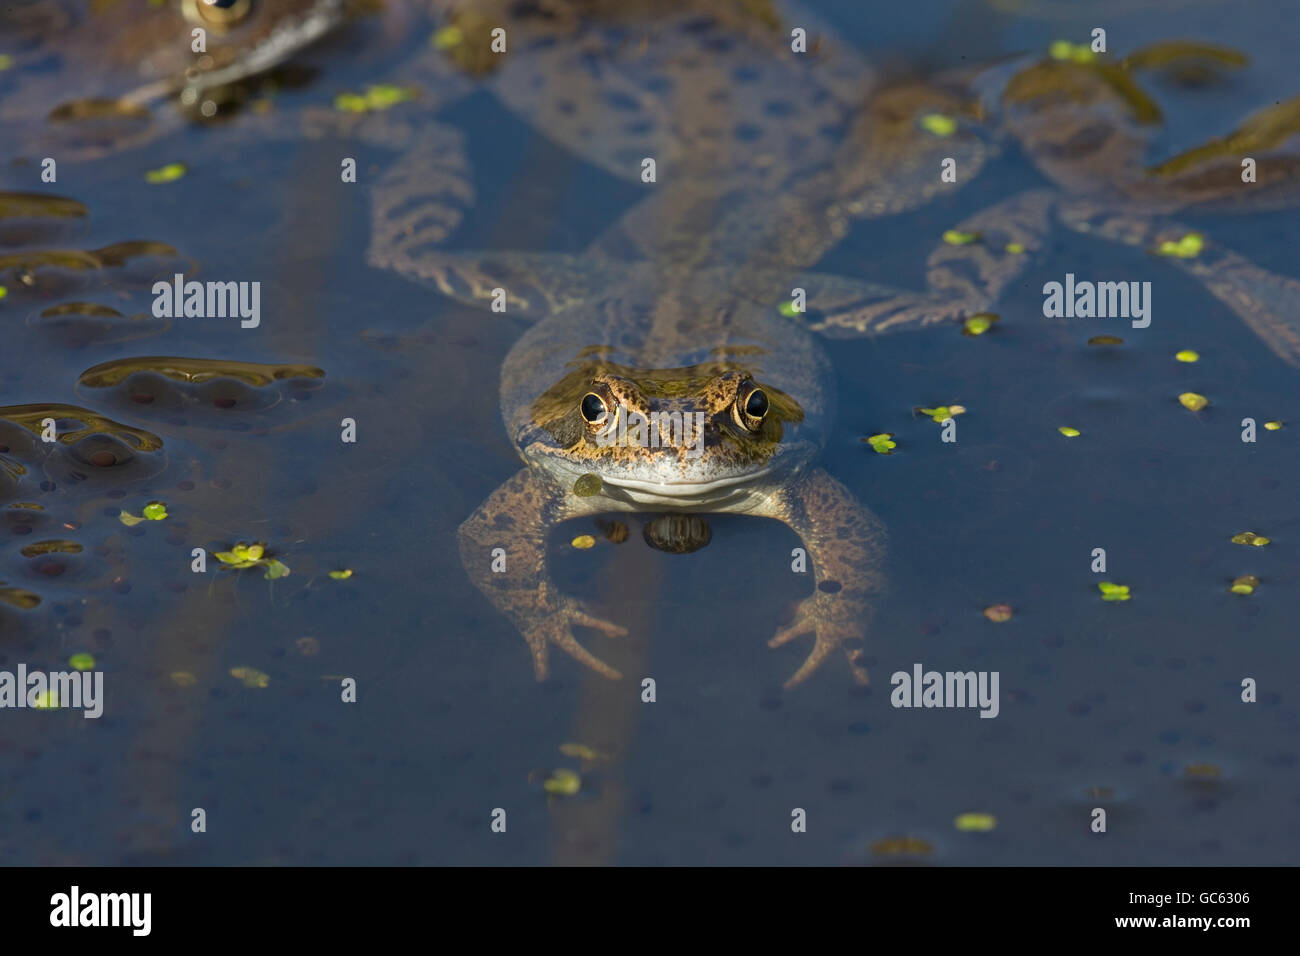 single Common Frog Rana temporaria half submerged in garden pond at spawning time Stock Photo